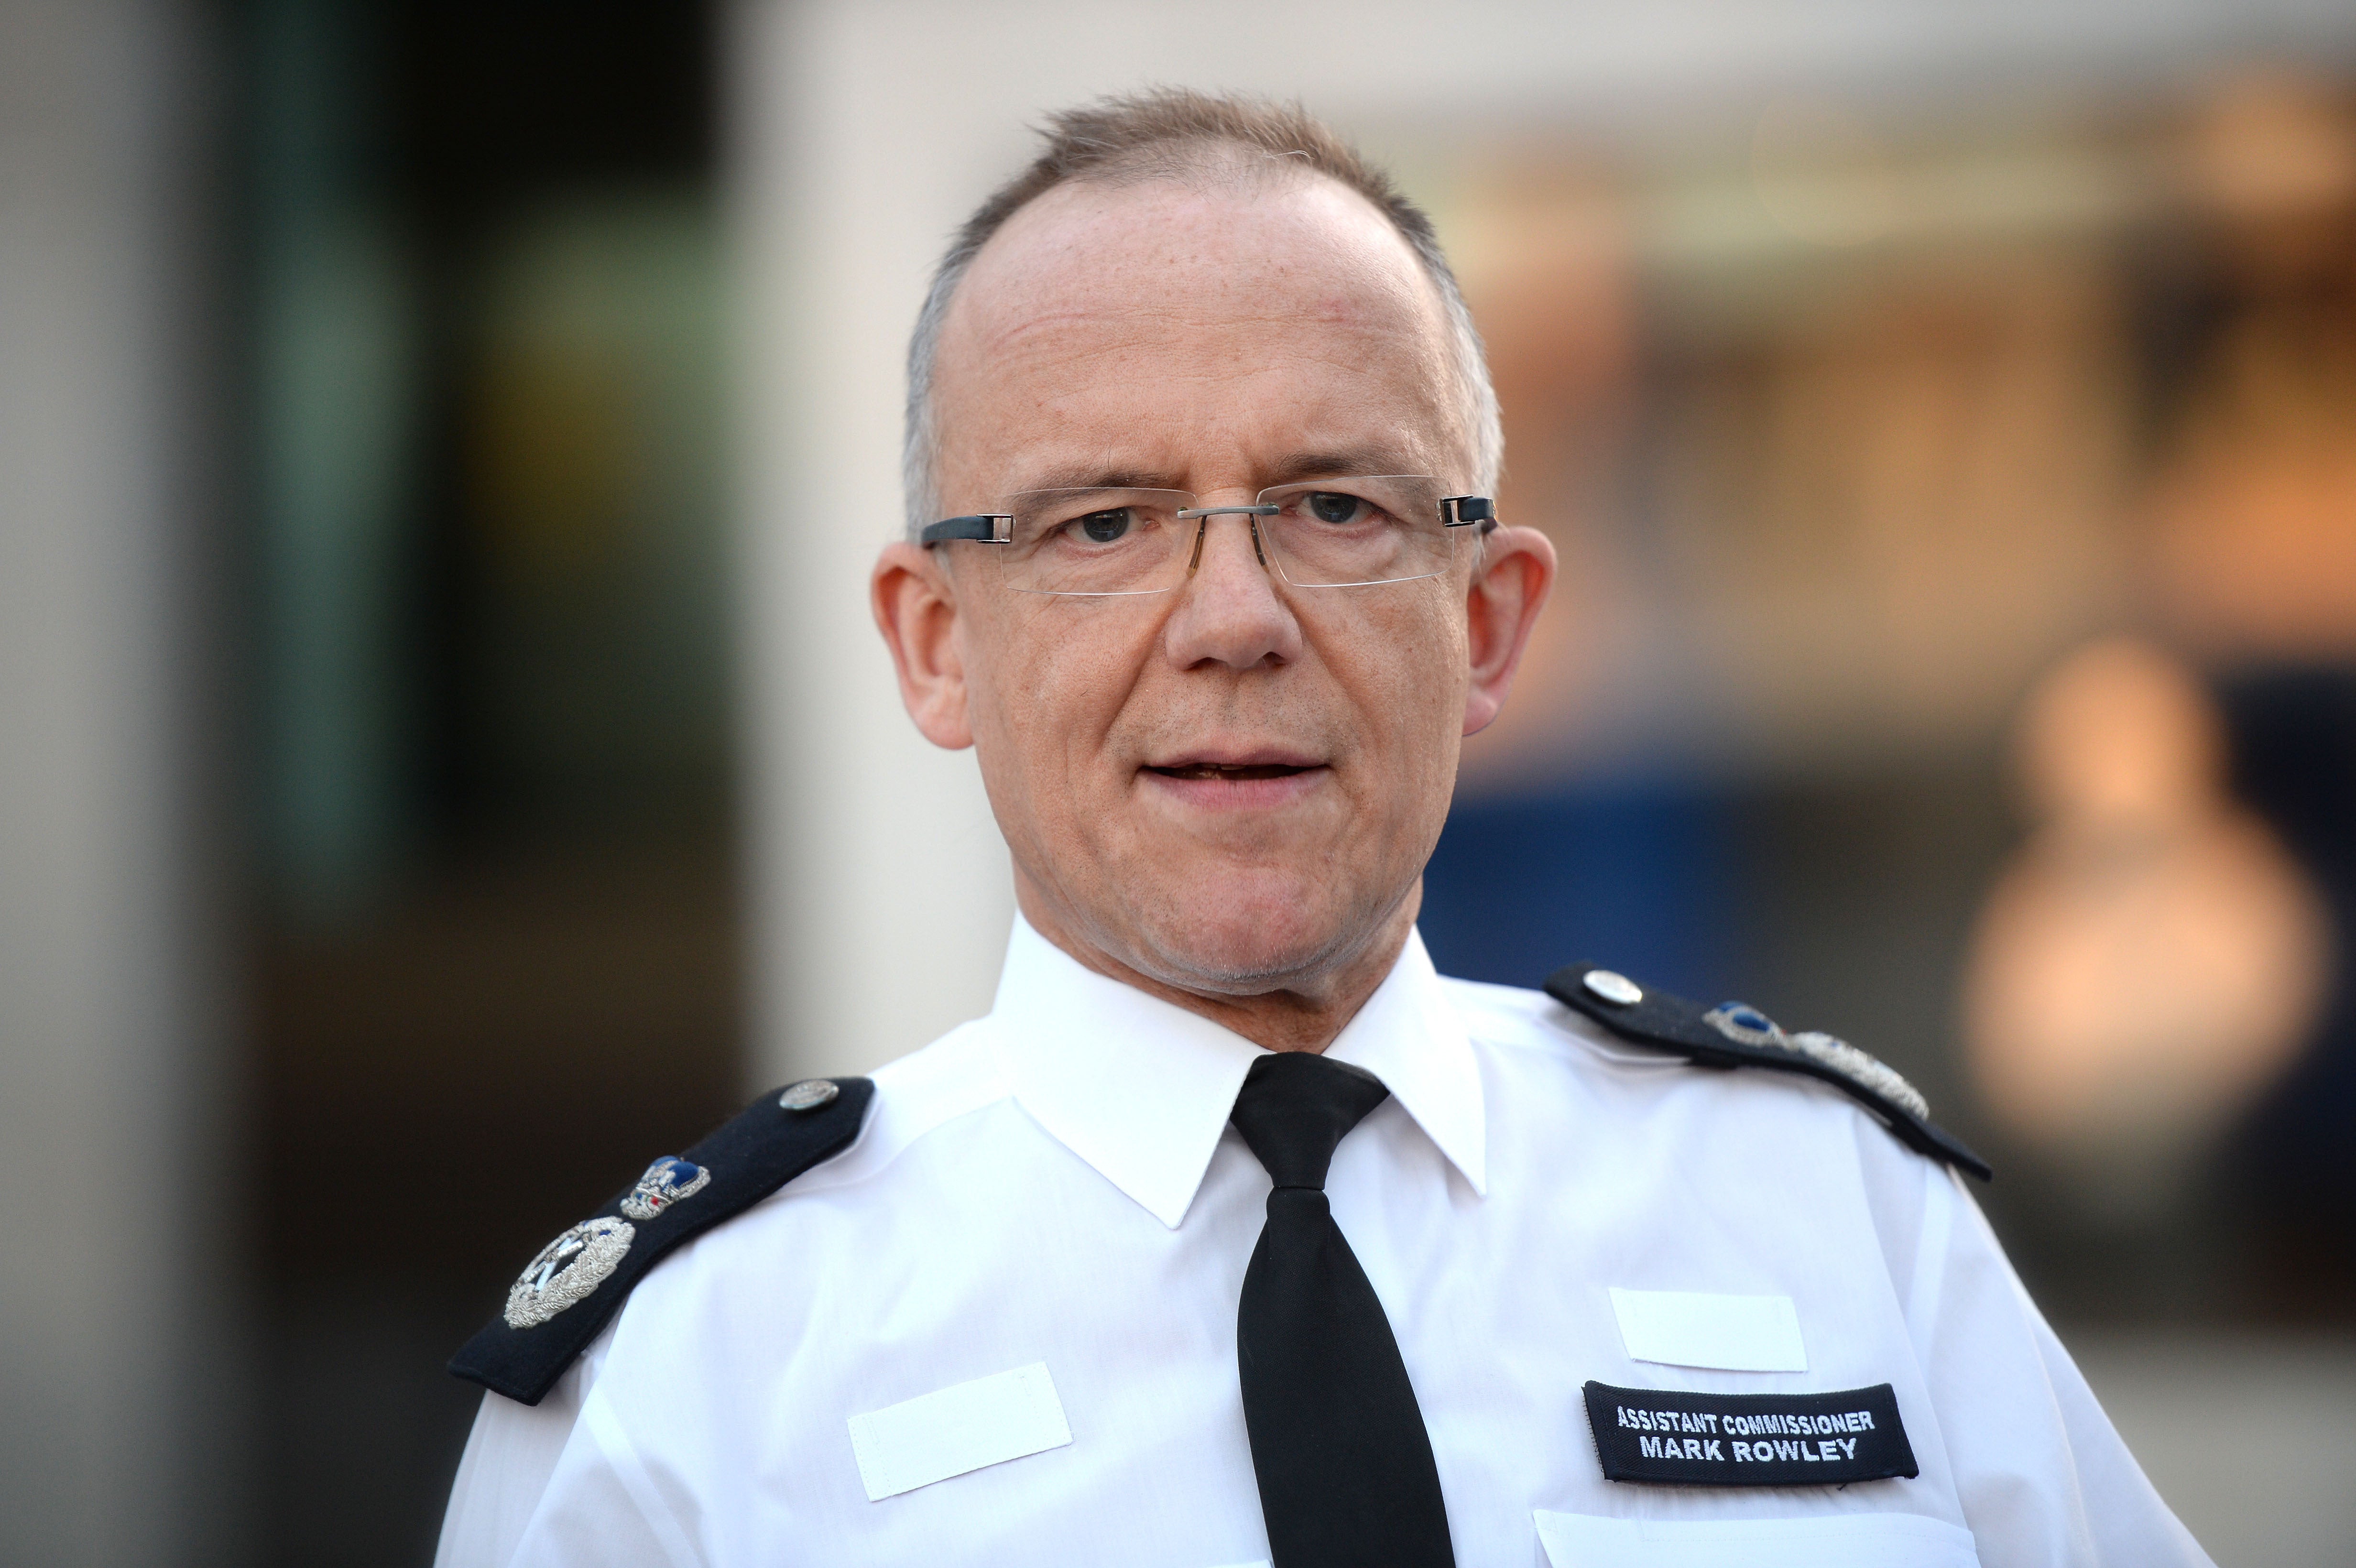 Sir Mark Rowley has been appointed as the new commissioner, four years after he retired in 2018 (Kirsty O’Connor/PA)